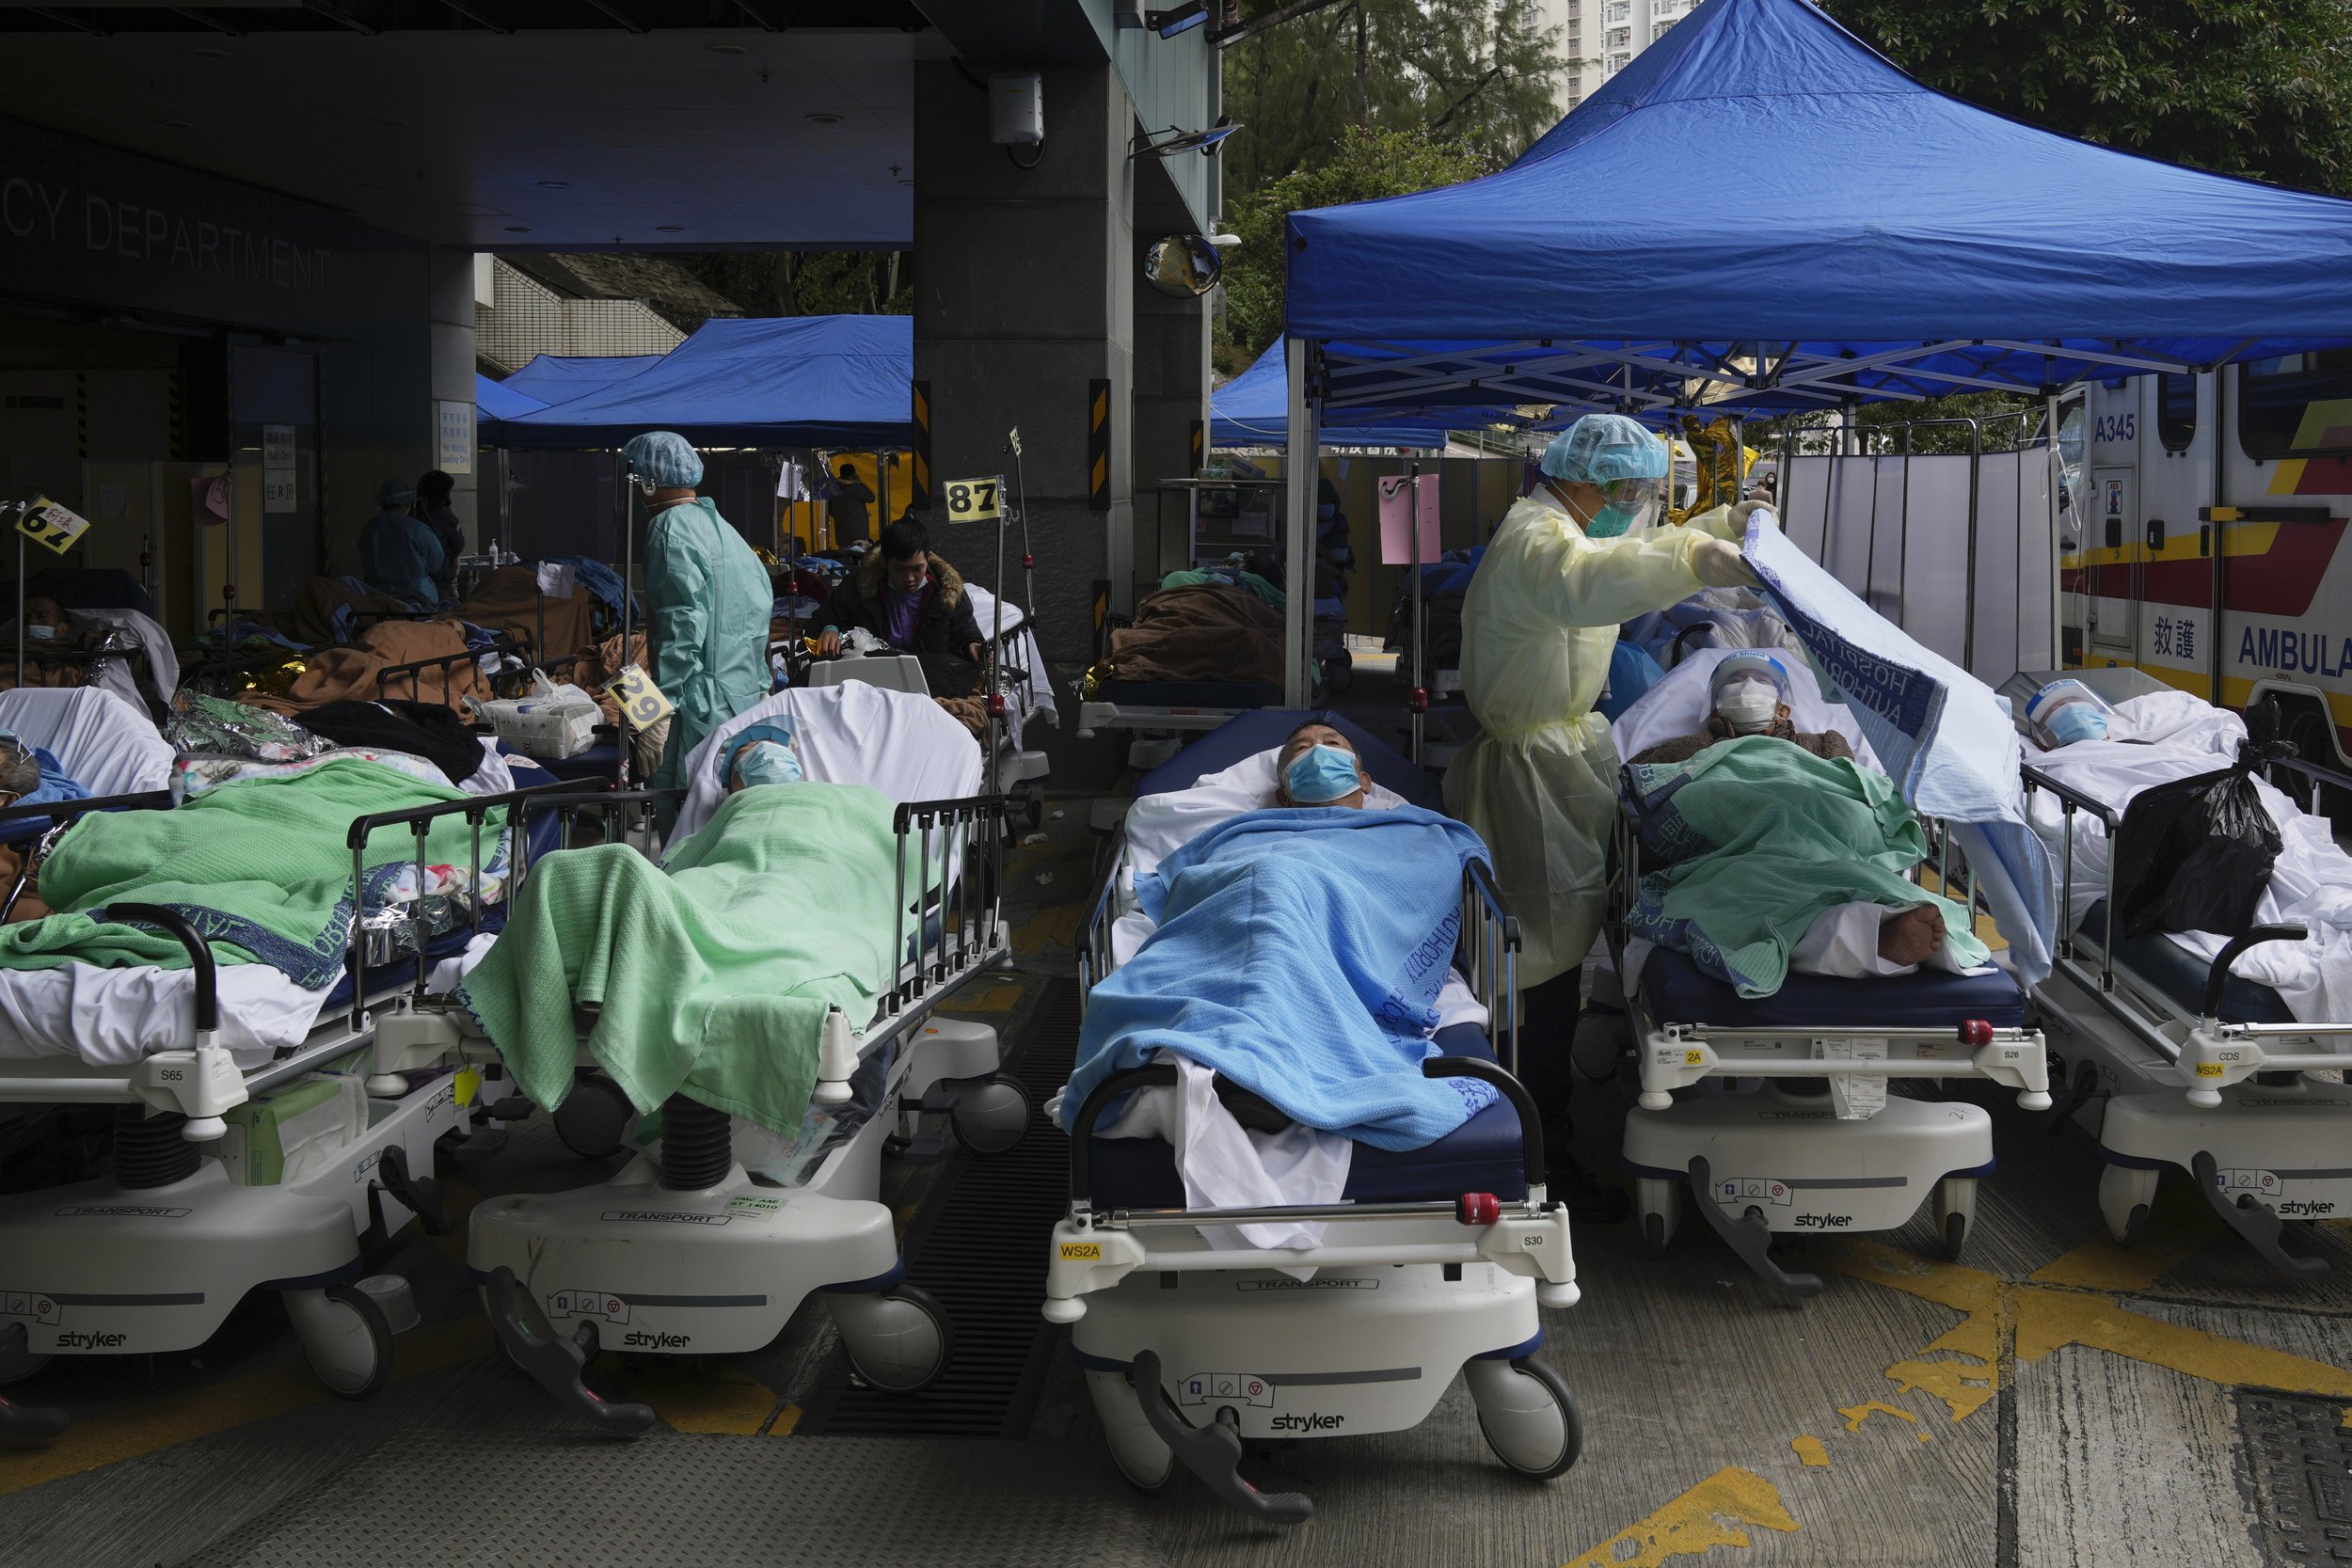  Patients lie on hospital beds as they wait at a temporary makeshift treatment area outside Caritas Medical Centre in Hong Kong, Friday, Feb. 18, 2022. Hong Kong's hospitals reached 90% capacity on Thursday and quarantine facilities were at their lim